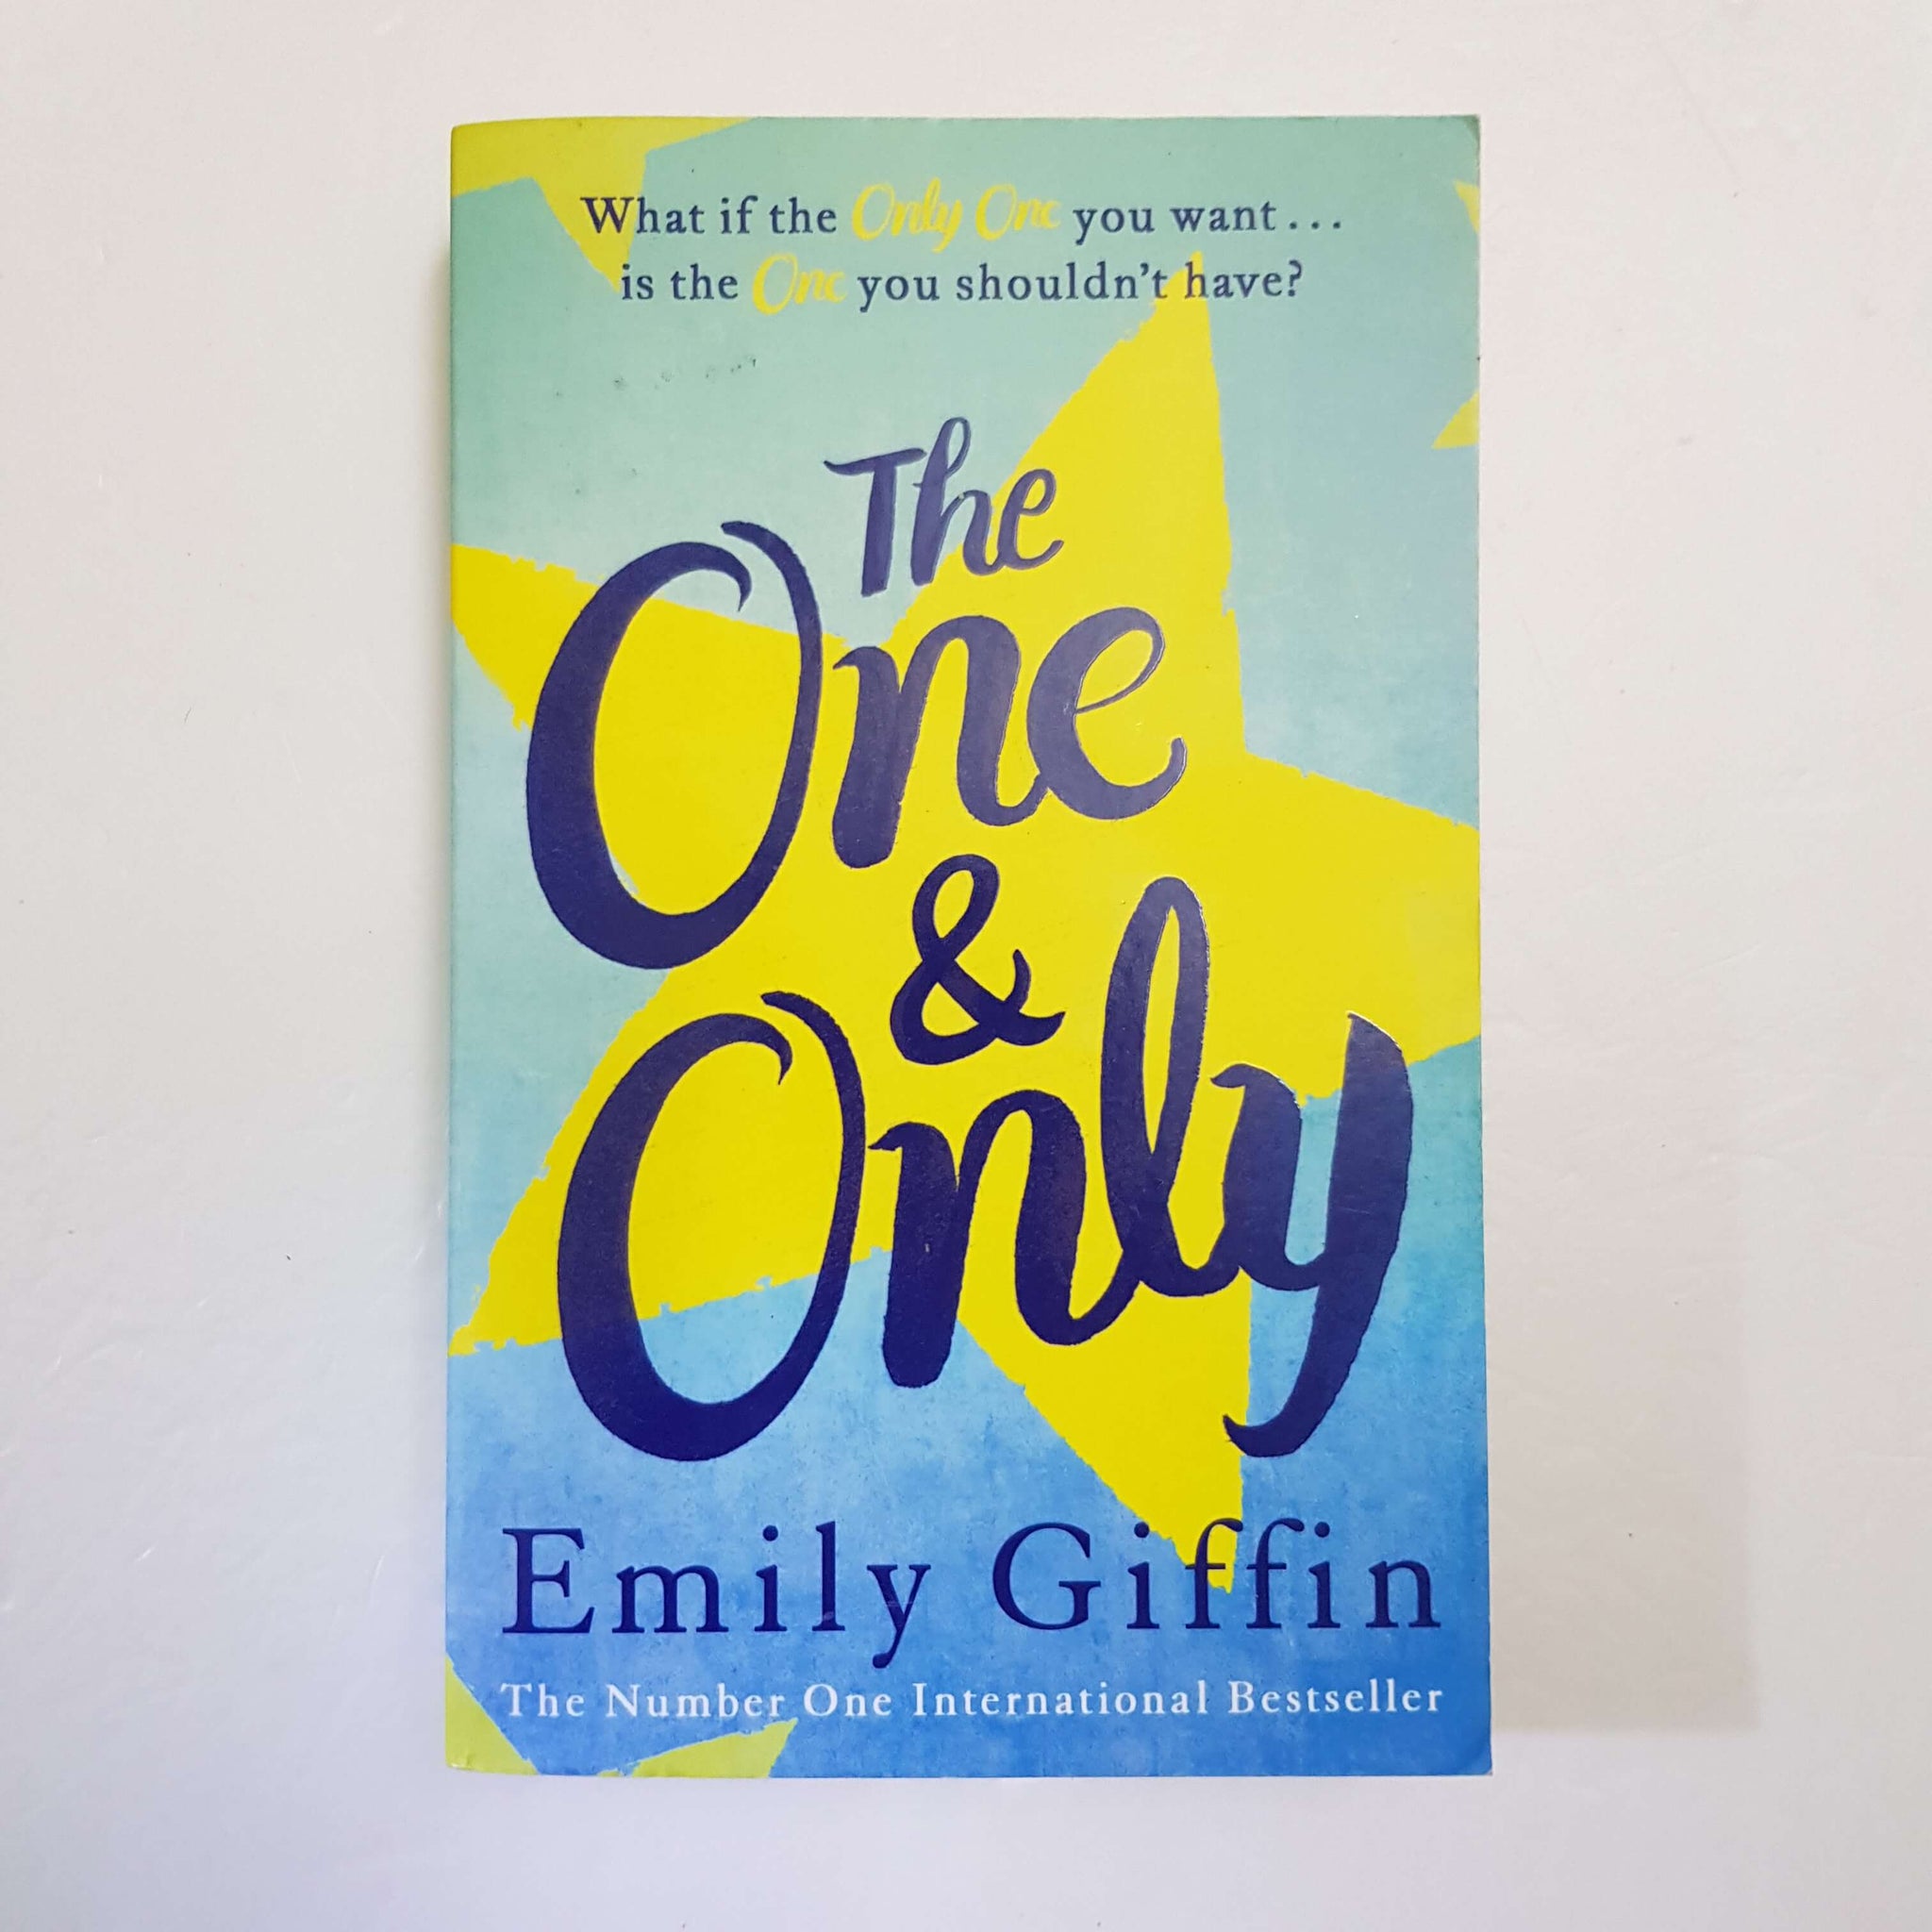 The One & Only by Emily Giffin